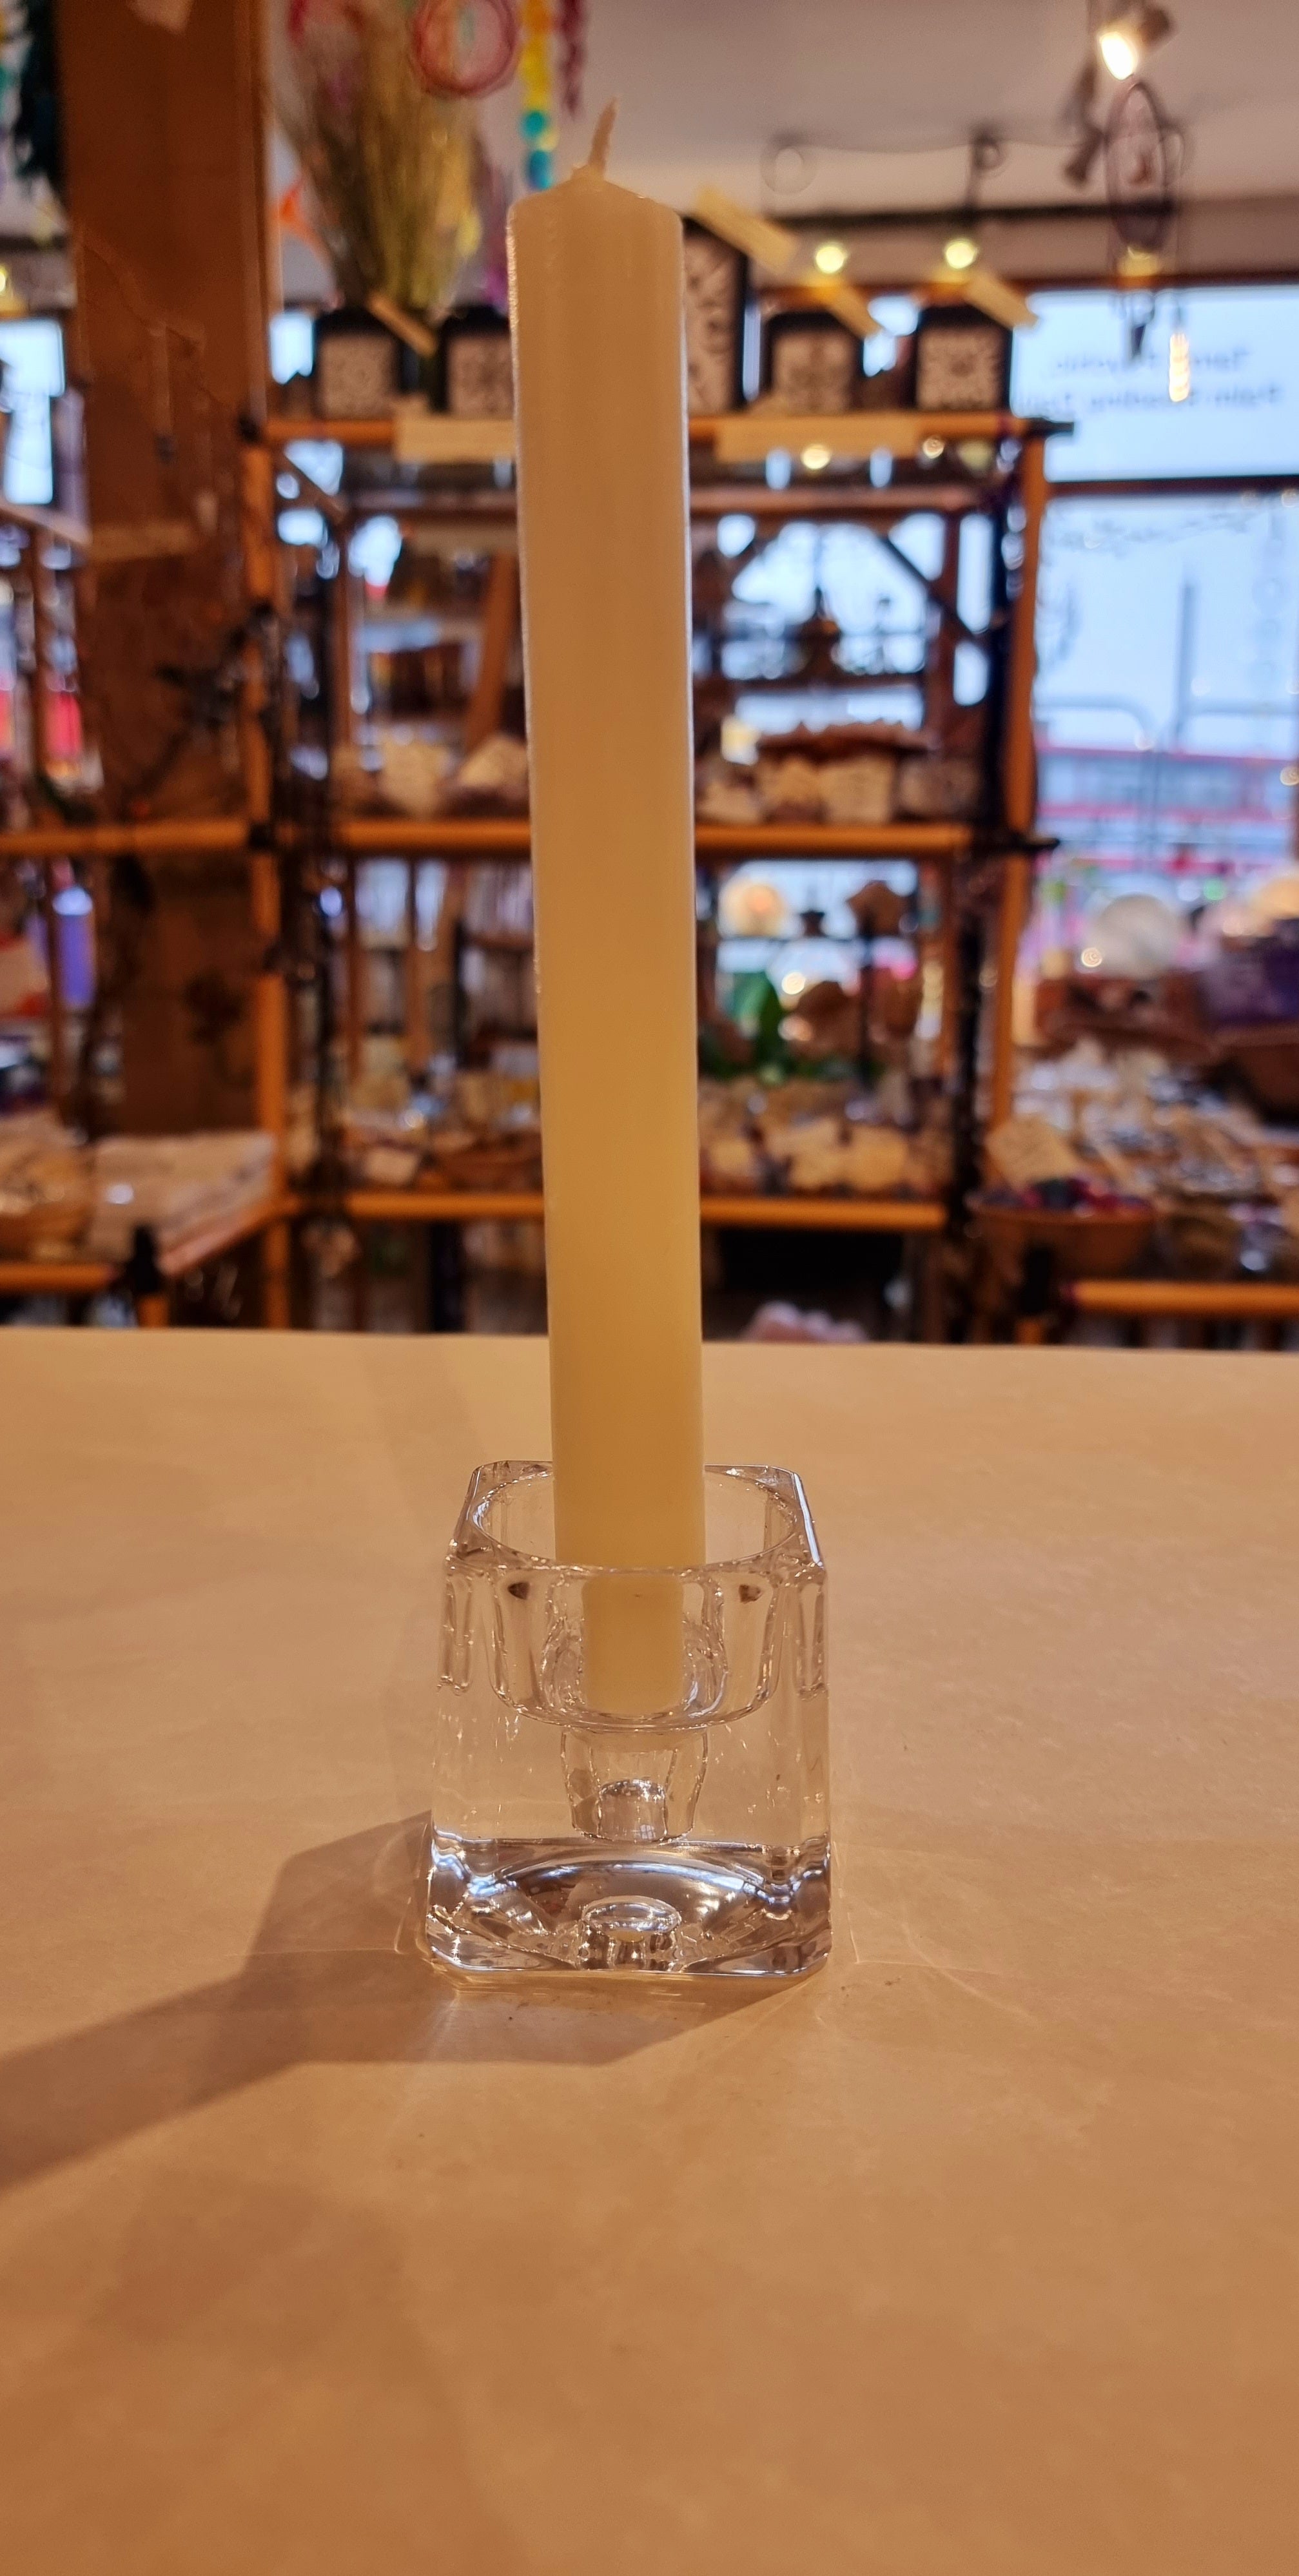 White Rustic Candle